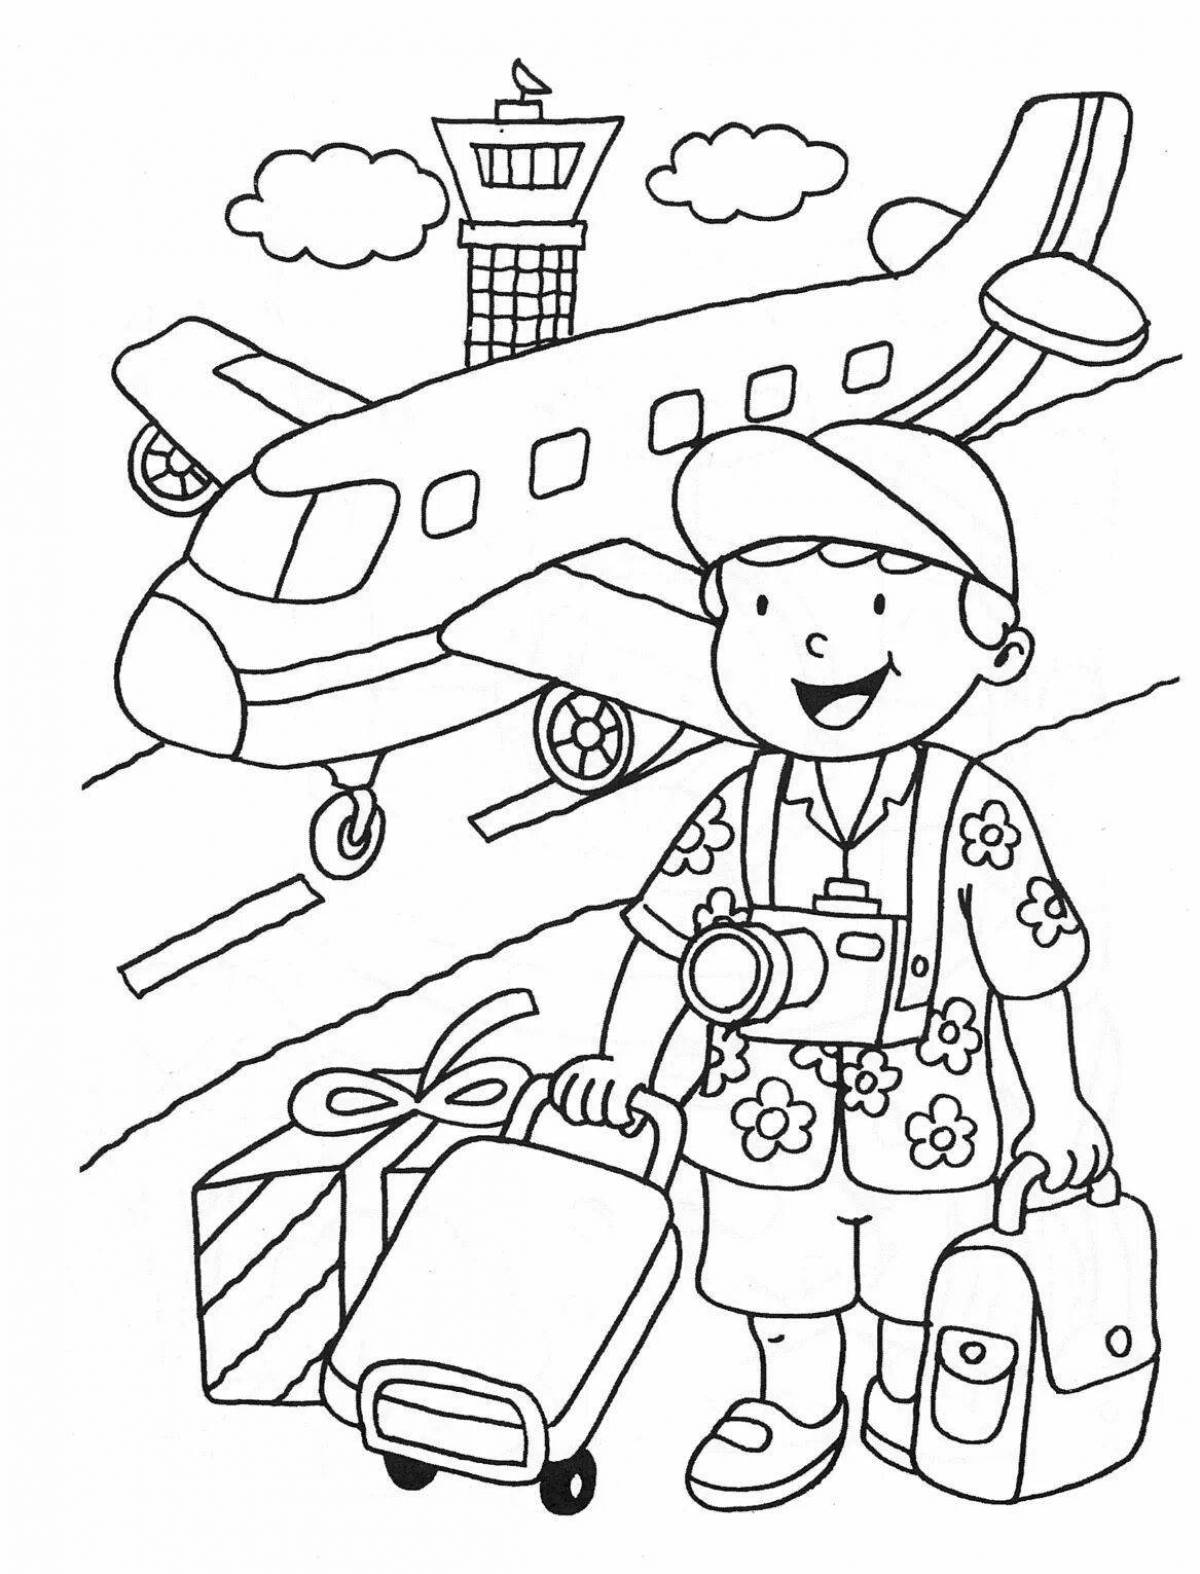 Coloring page grand journey